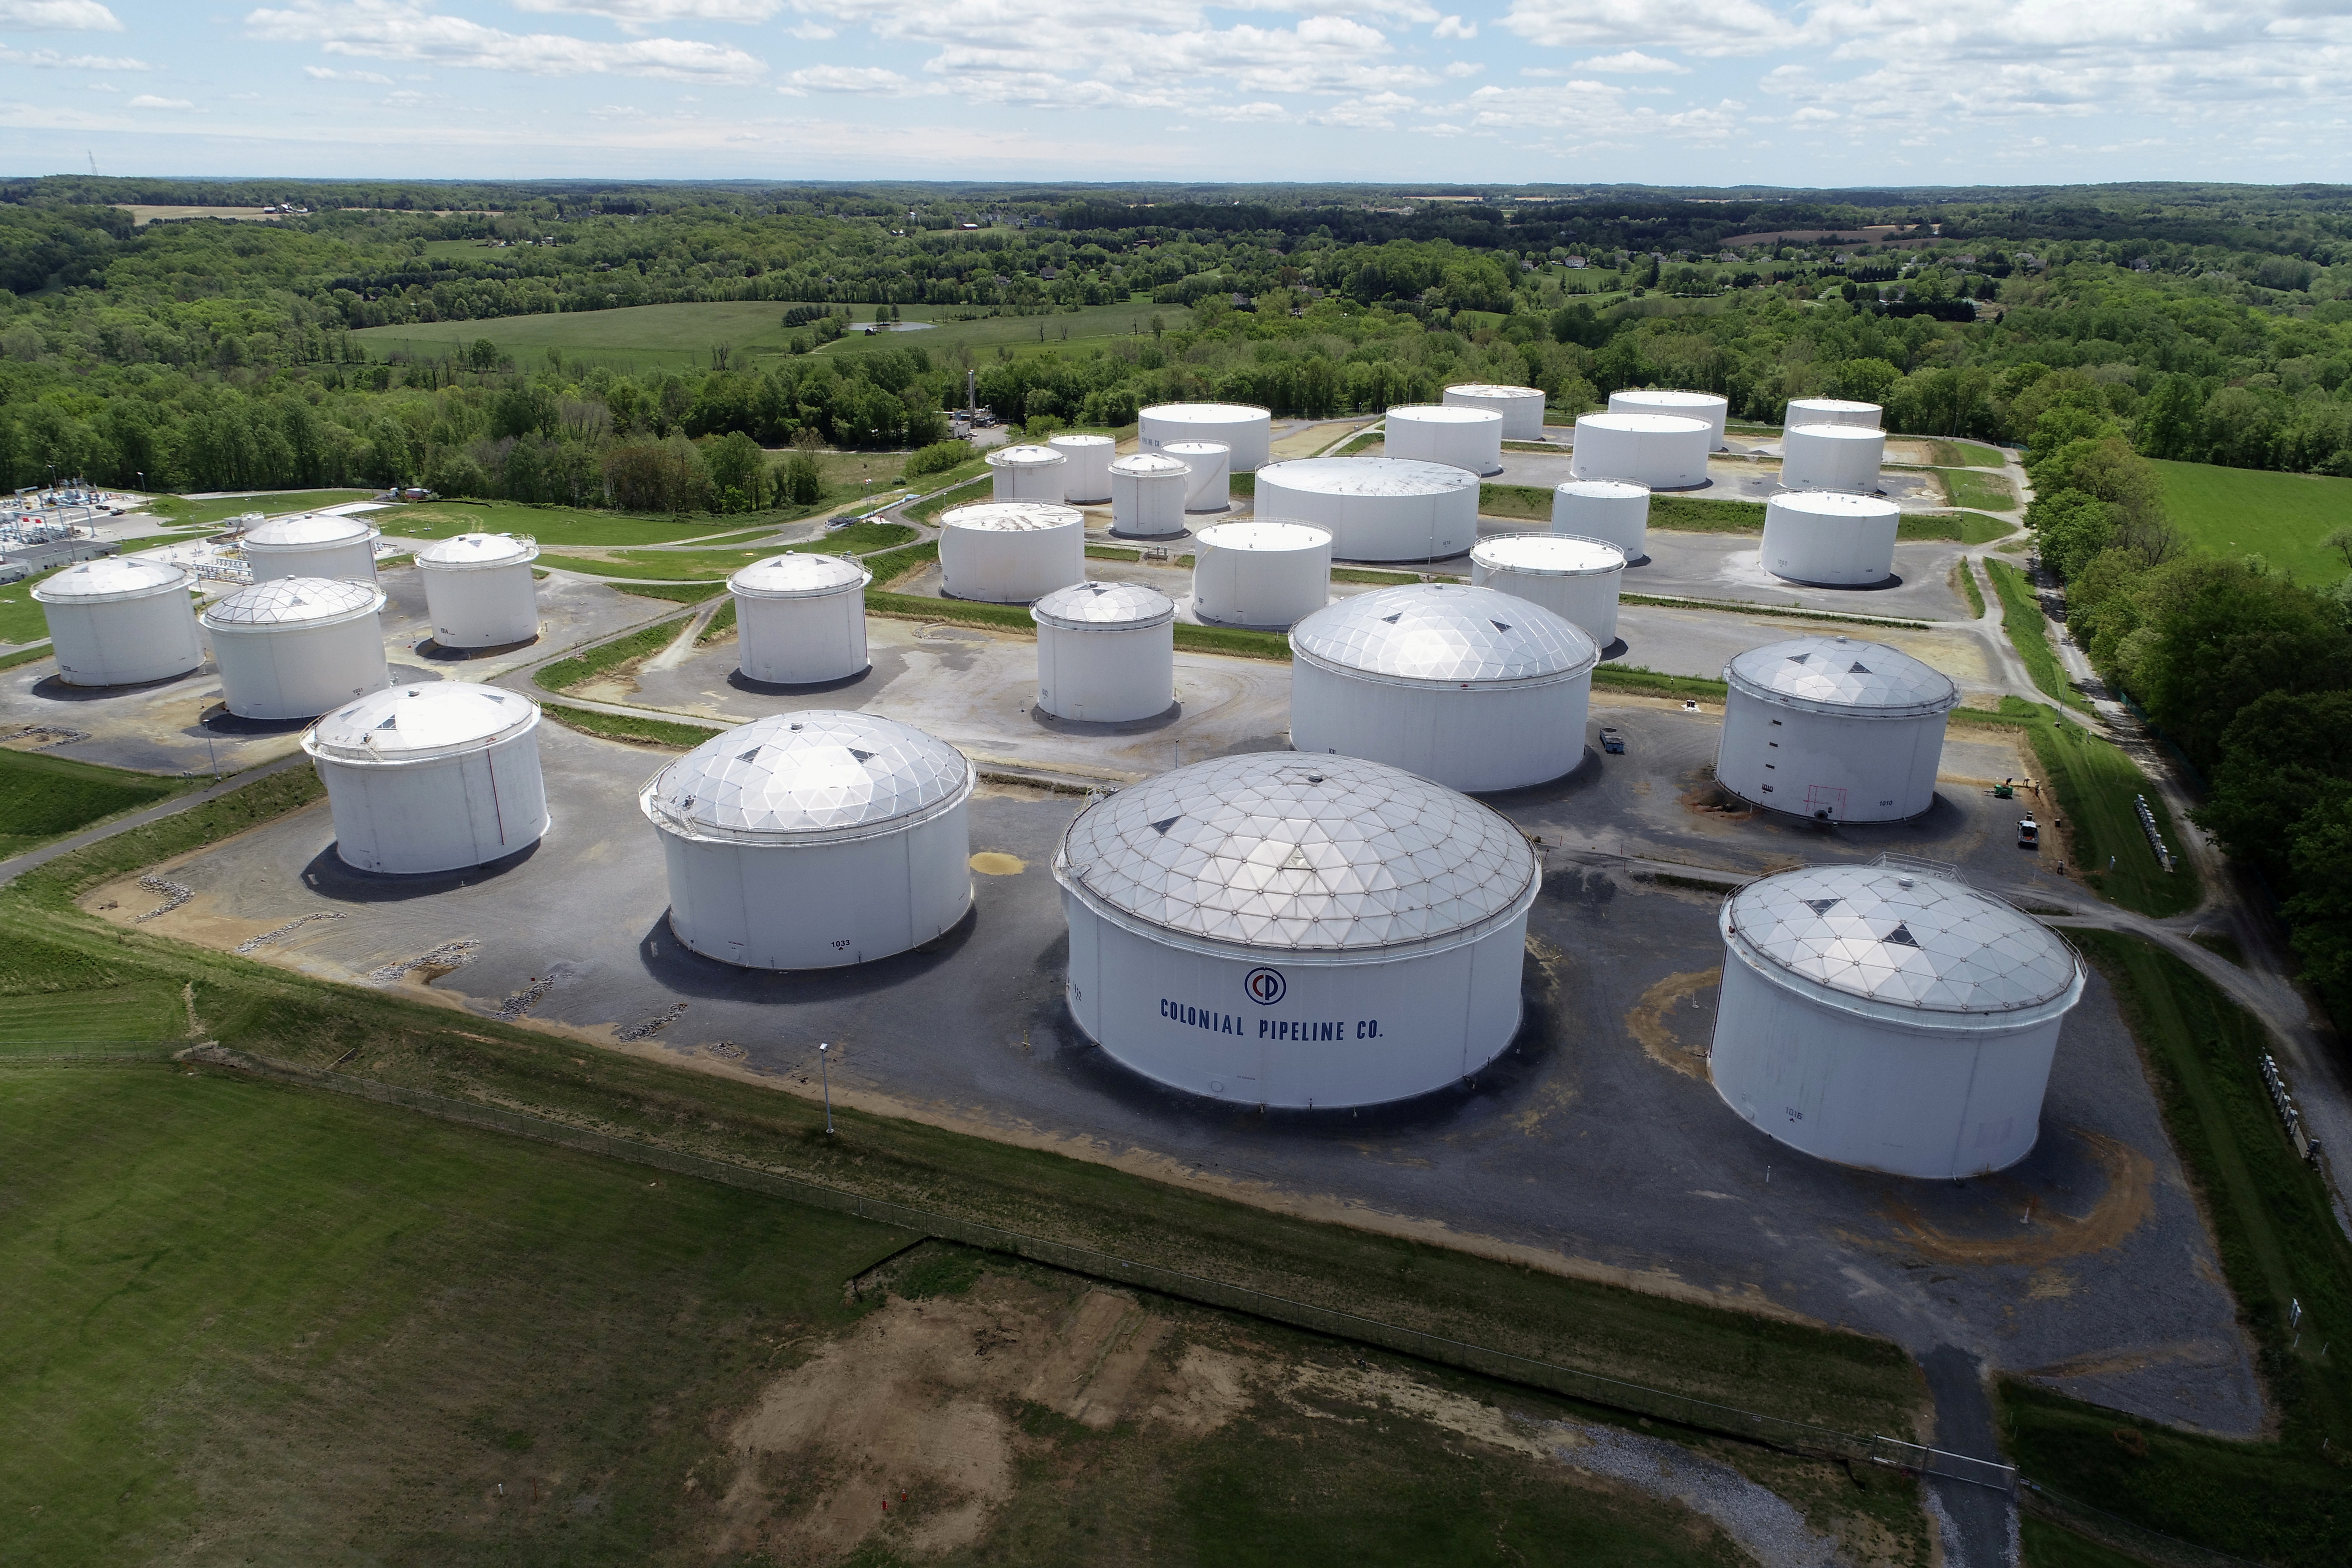 Holding tanks are seen in an aerial photograph at Colonial Pipeline's Dorsey Junction Station in Woodbine, Maryland, U.S. May 10, 2021. REUTERS/Drone Base